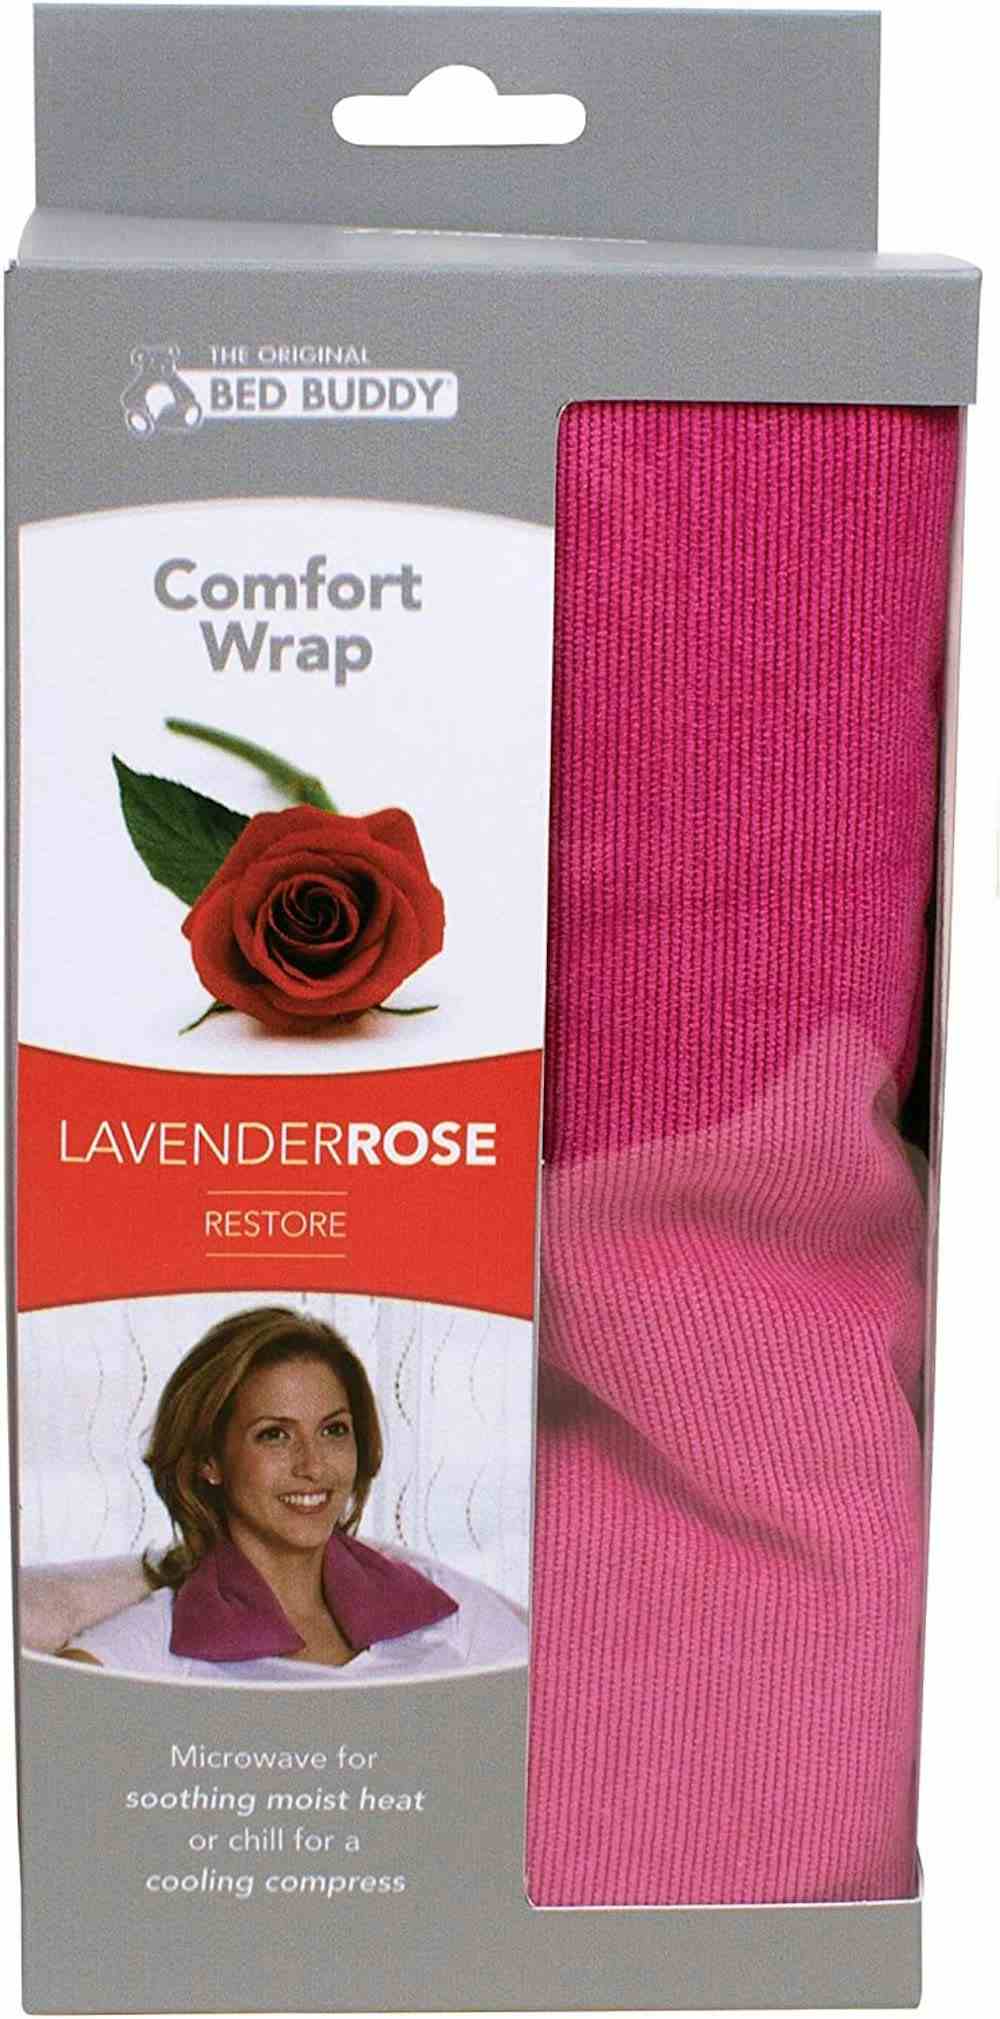 Bed Buddy Comfort Wrap, Lavender and Rose Fragrance, BBF4011-12, 1 Each